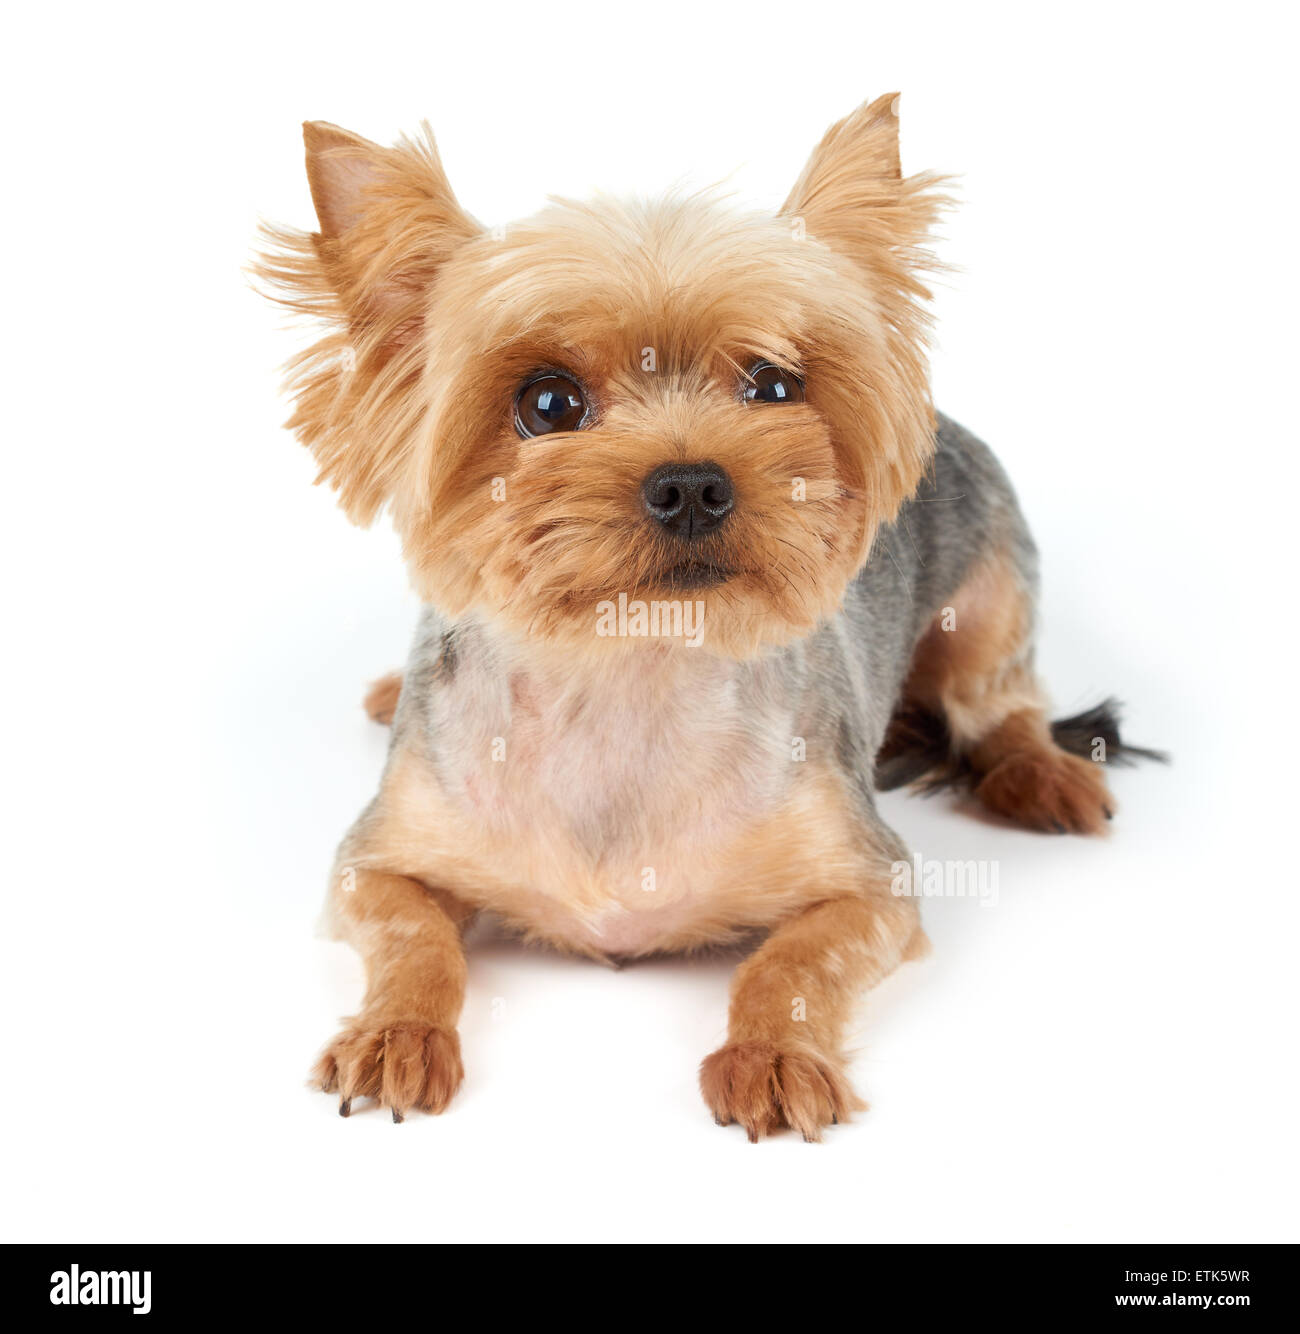 Yorkshire Terrier with large eyes and short haircut isolated on white background Stock Photo